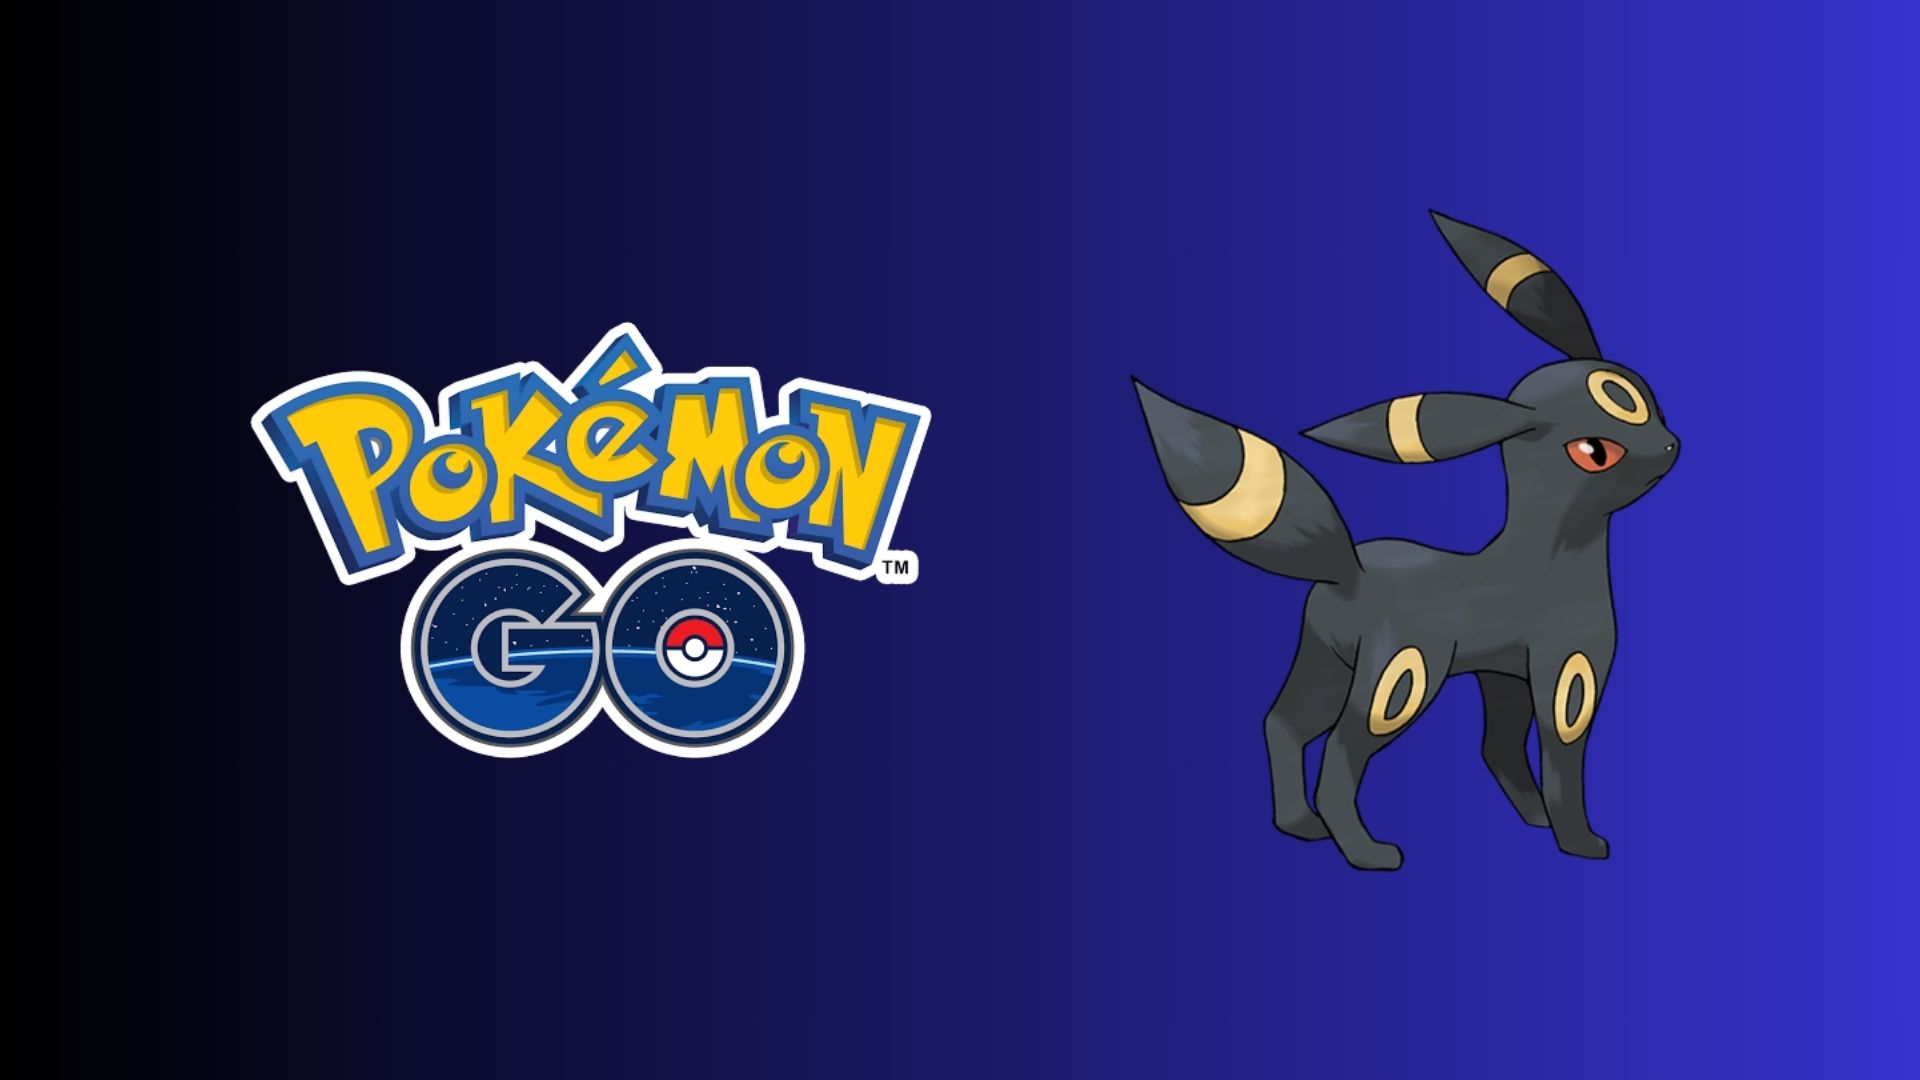 How to Get Umbreon and the Other Eeveelutions in 'Pokémon GO